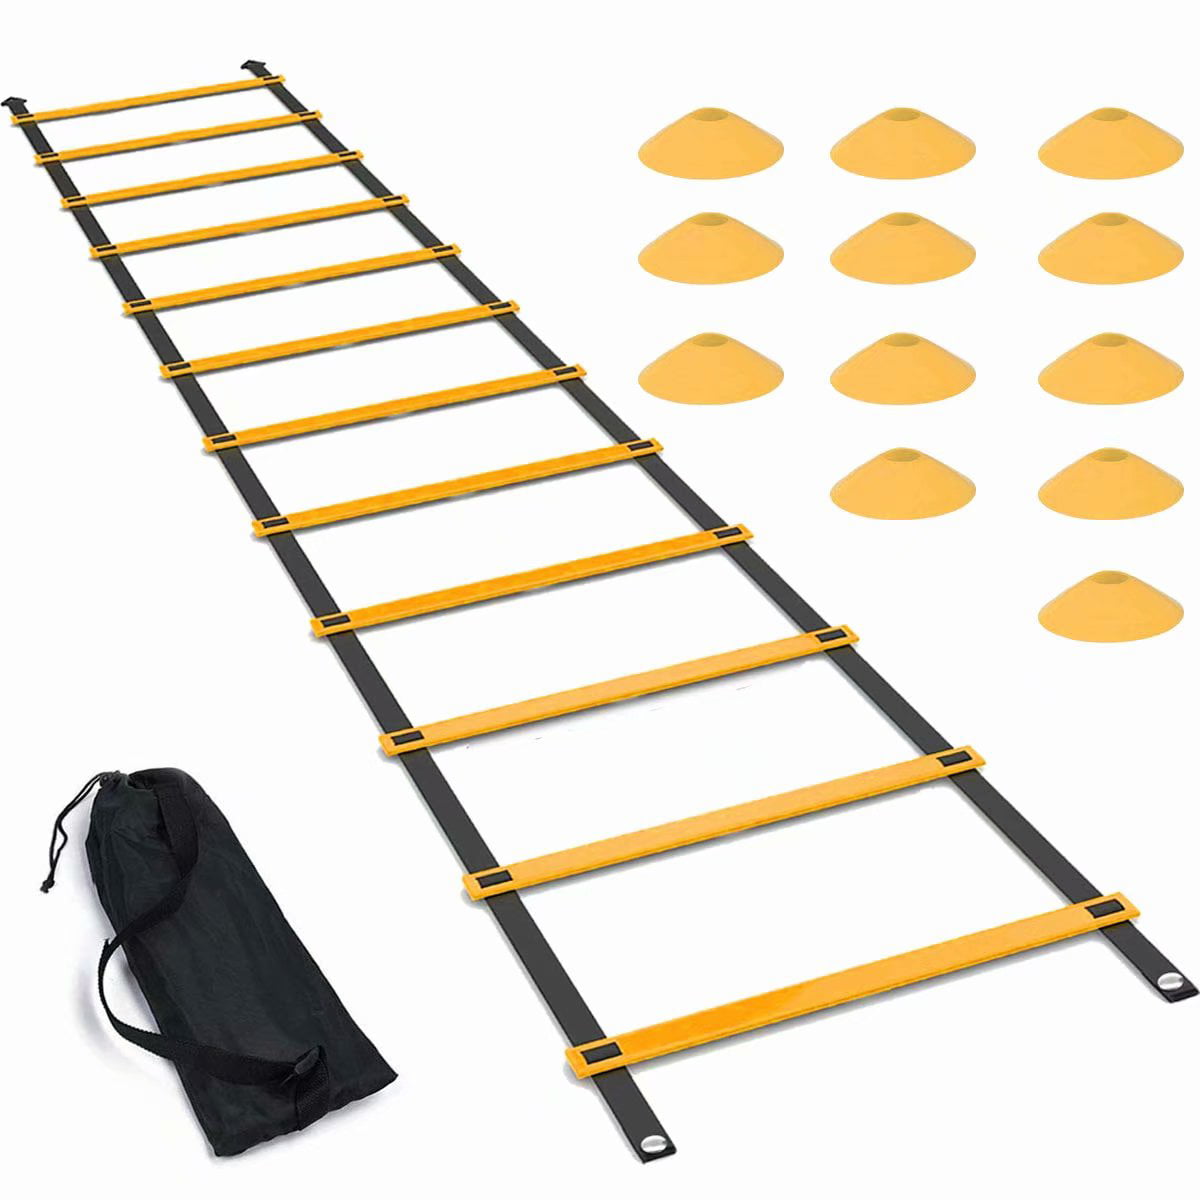 10pcs Disc Cones Health Ideal Fitness Exercise Drill Equipment Speed Agility Train Kit Agility and Spped Training Ladder 19Ft Flat Ladder 